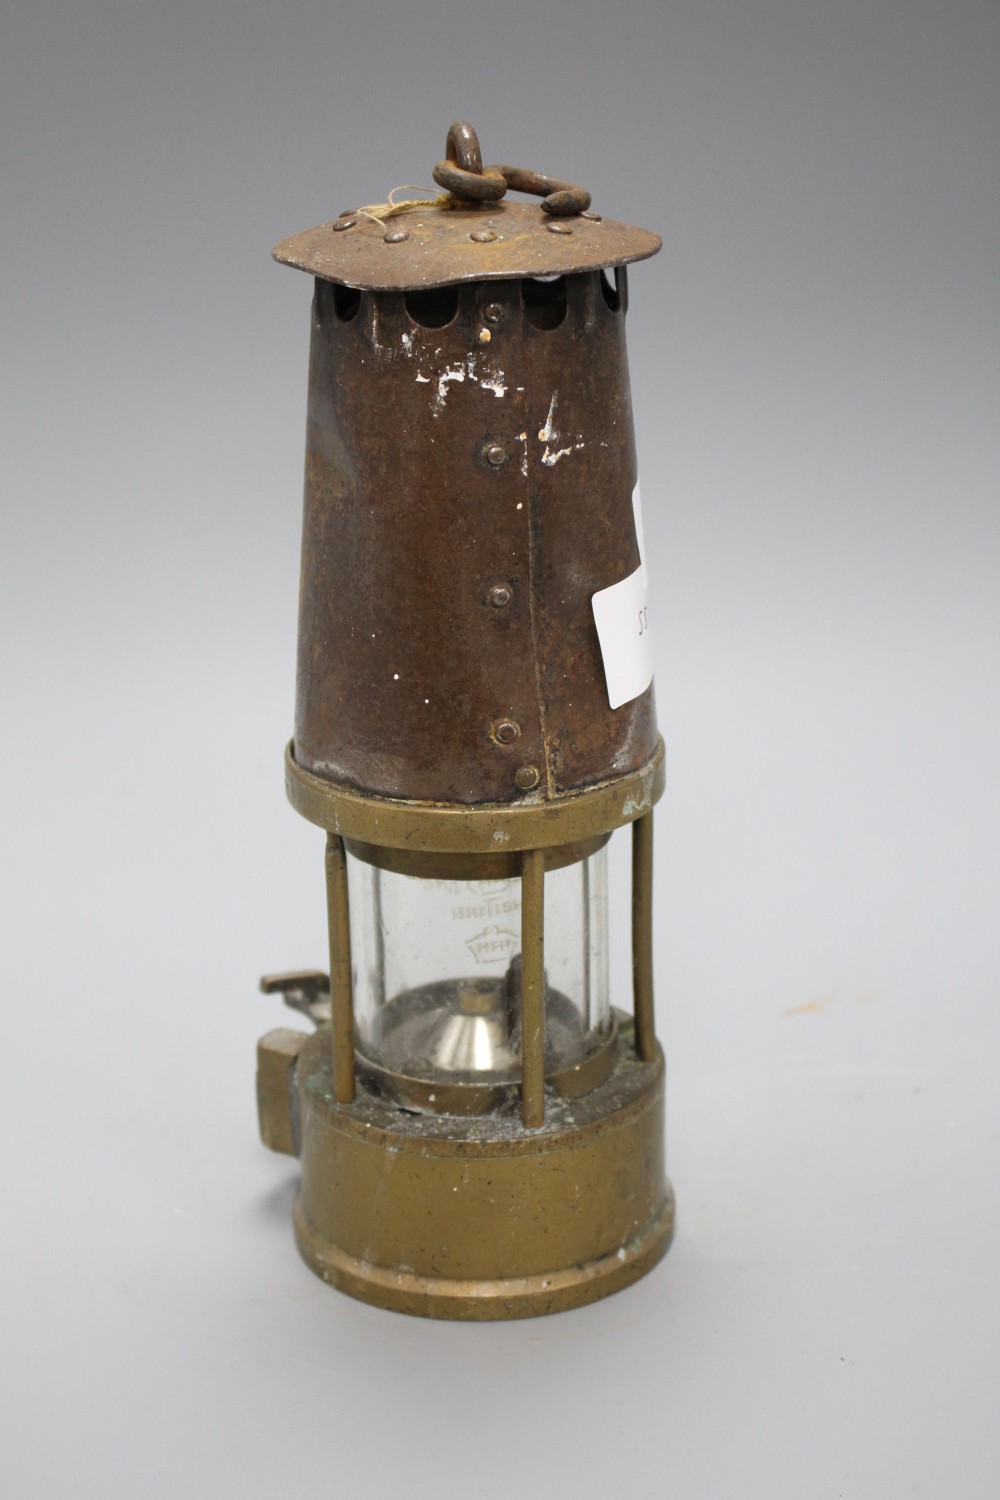 The Protector Lamp and Lighting Co Limited miners lamp, type S-L number 02926?, height 24.5cm